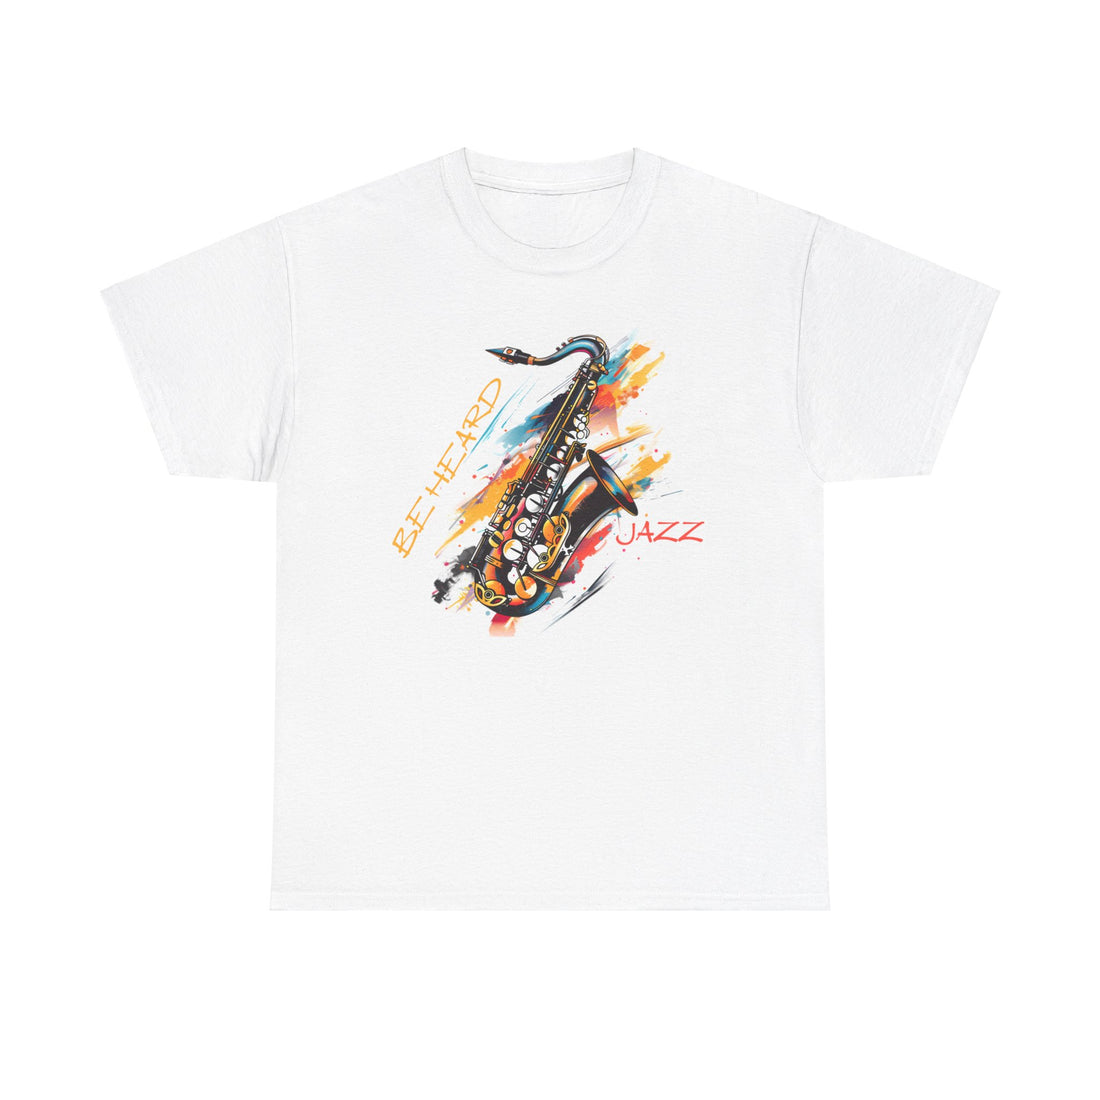 A black or white t shirt with a saxophone image. The words ‘Jazz, Be heard’ surround the image.